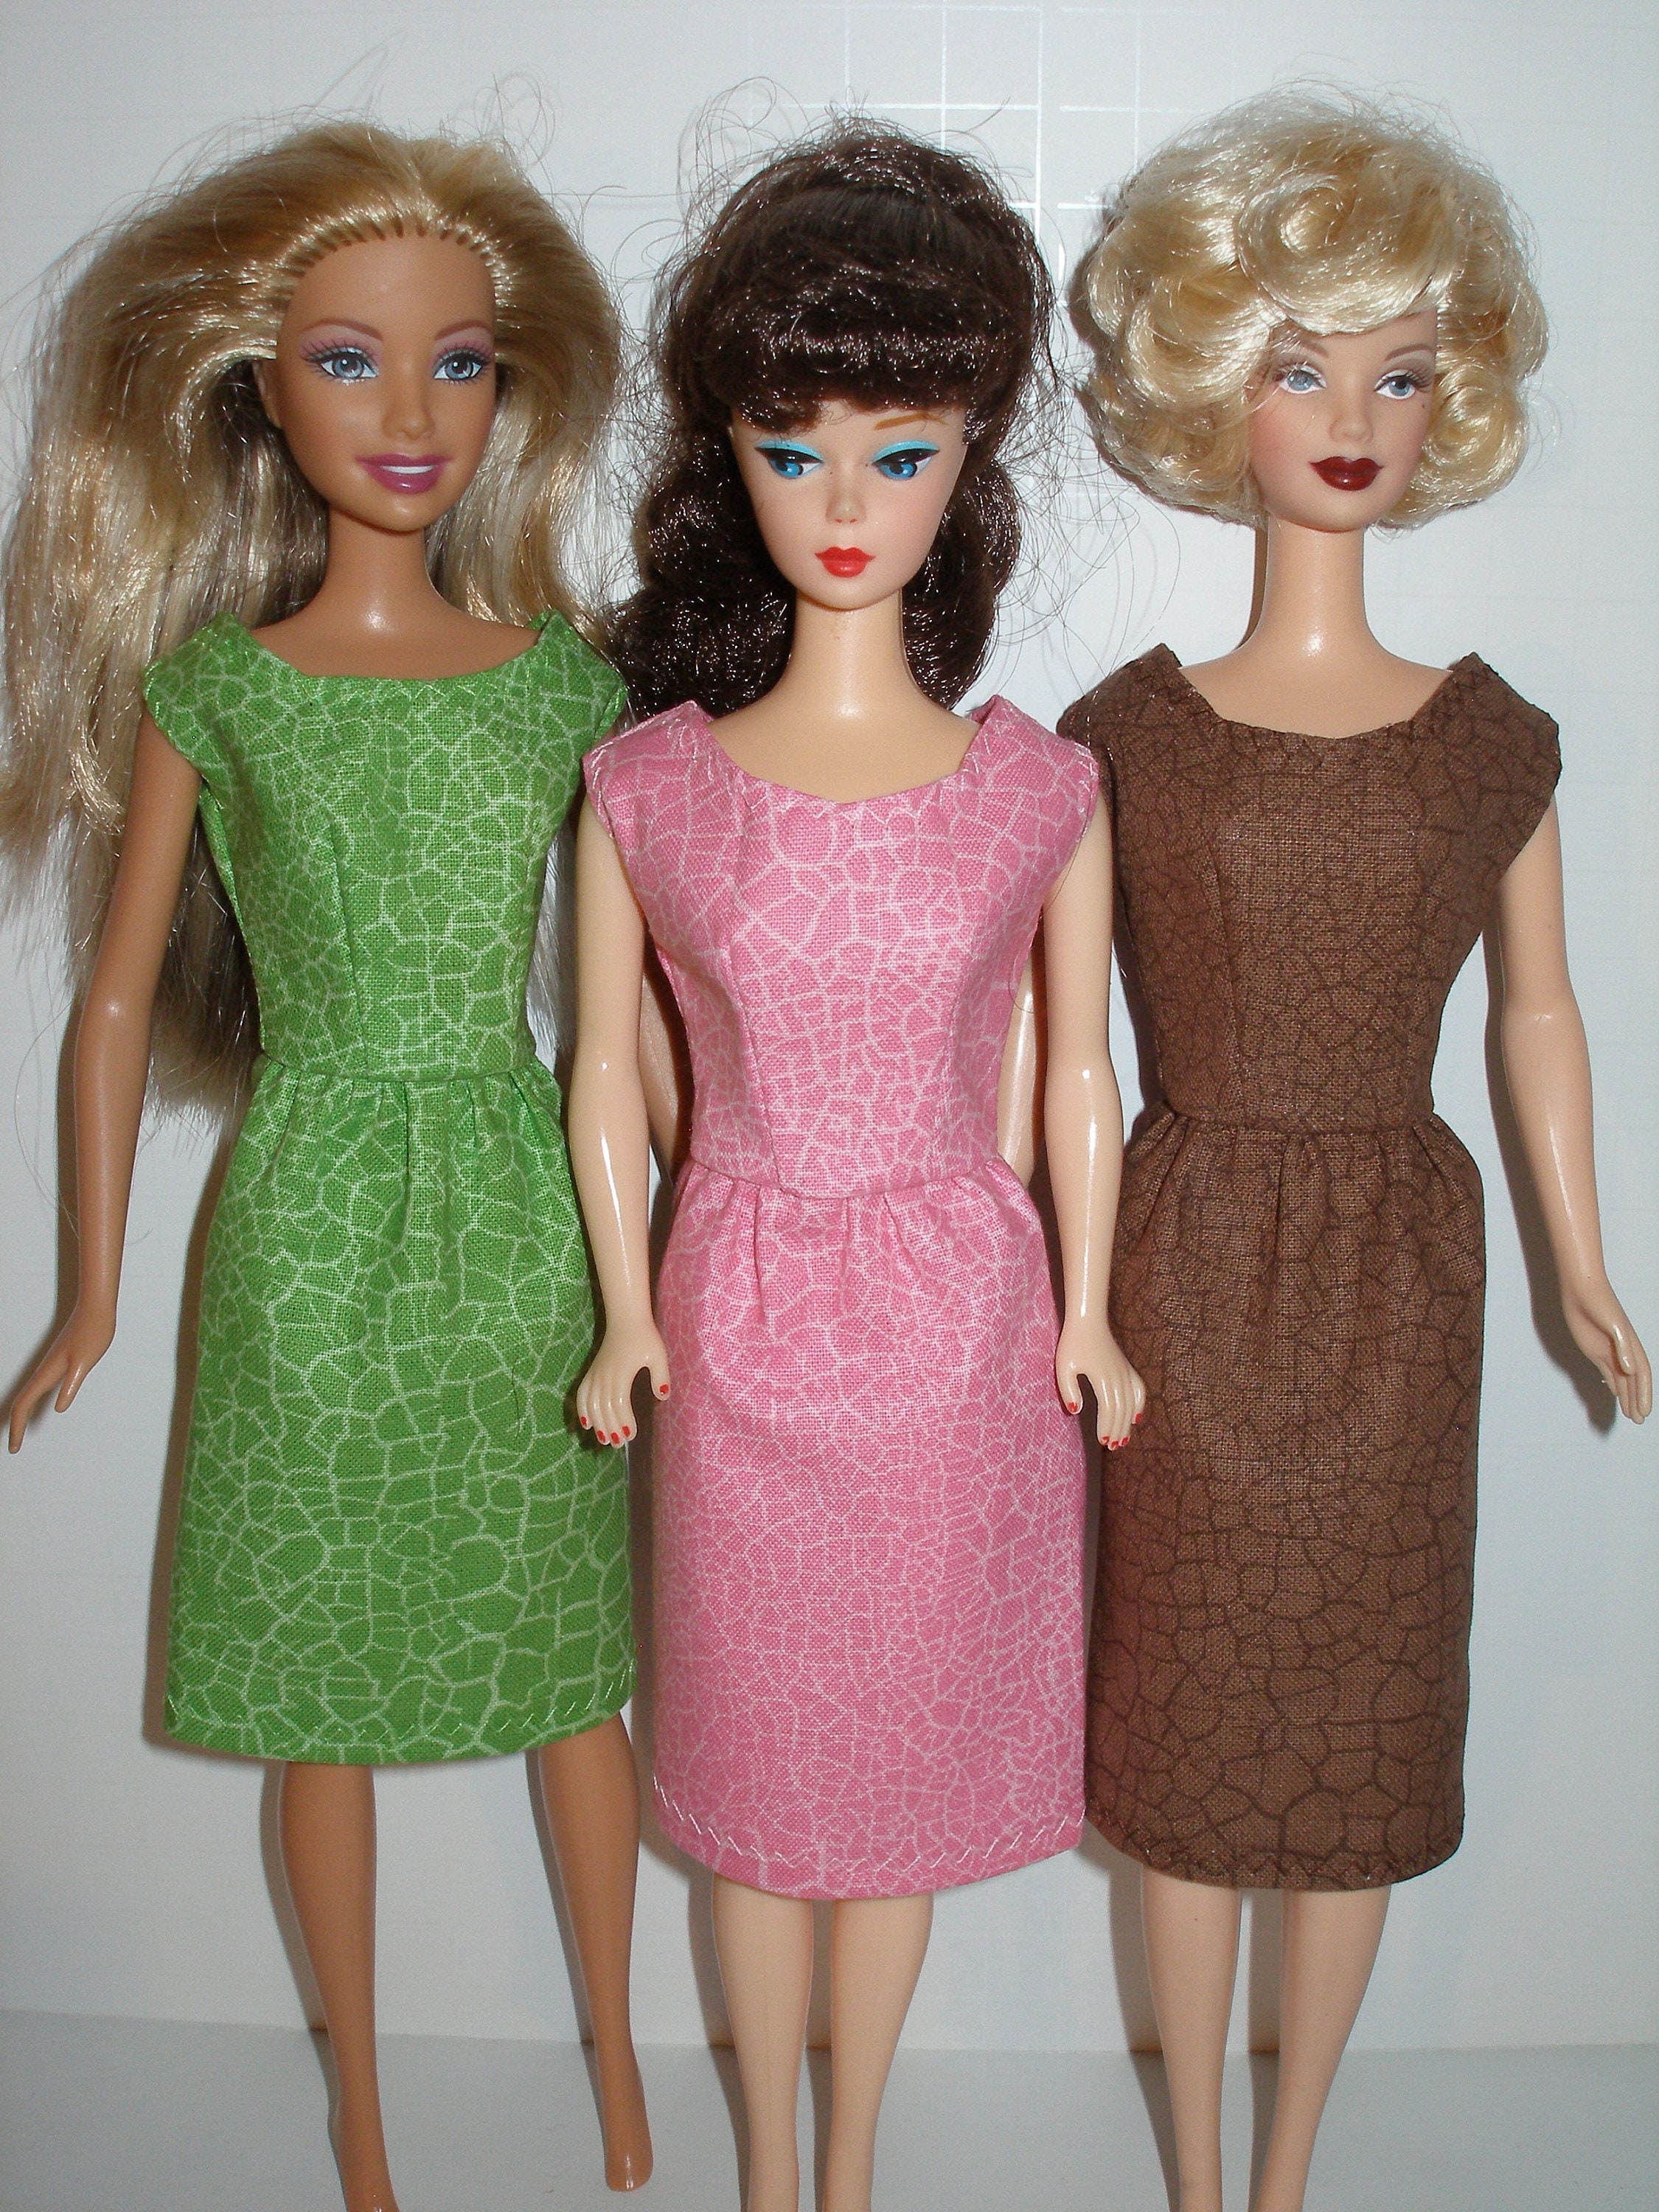 Fashion Doll Wardrobes and gowns For 11.5 inch Dolls like Barbie Your choice of new patterns